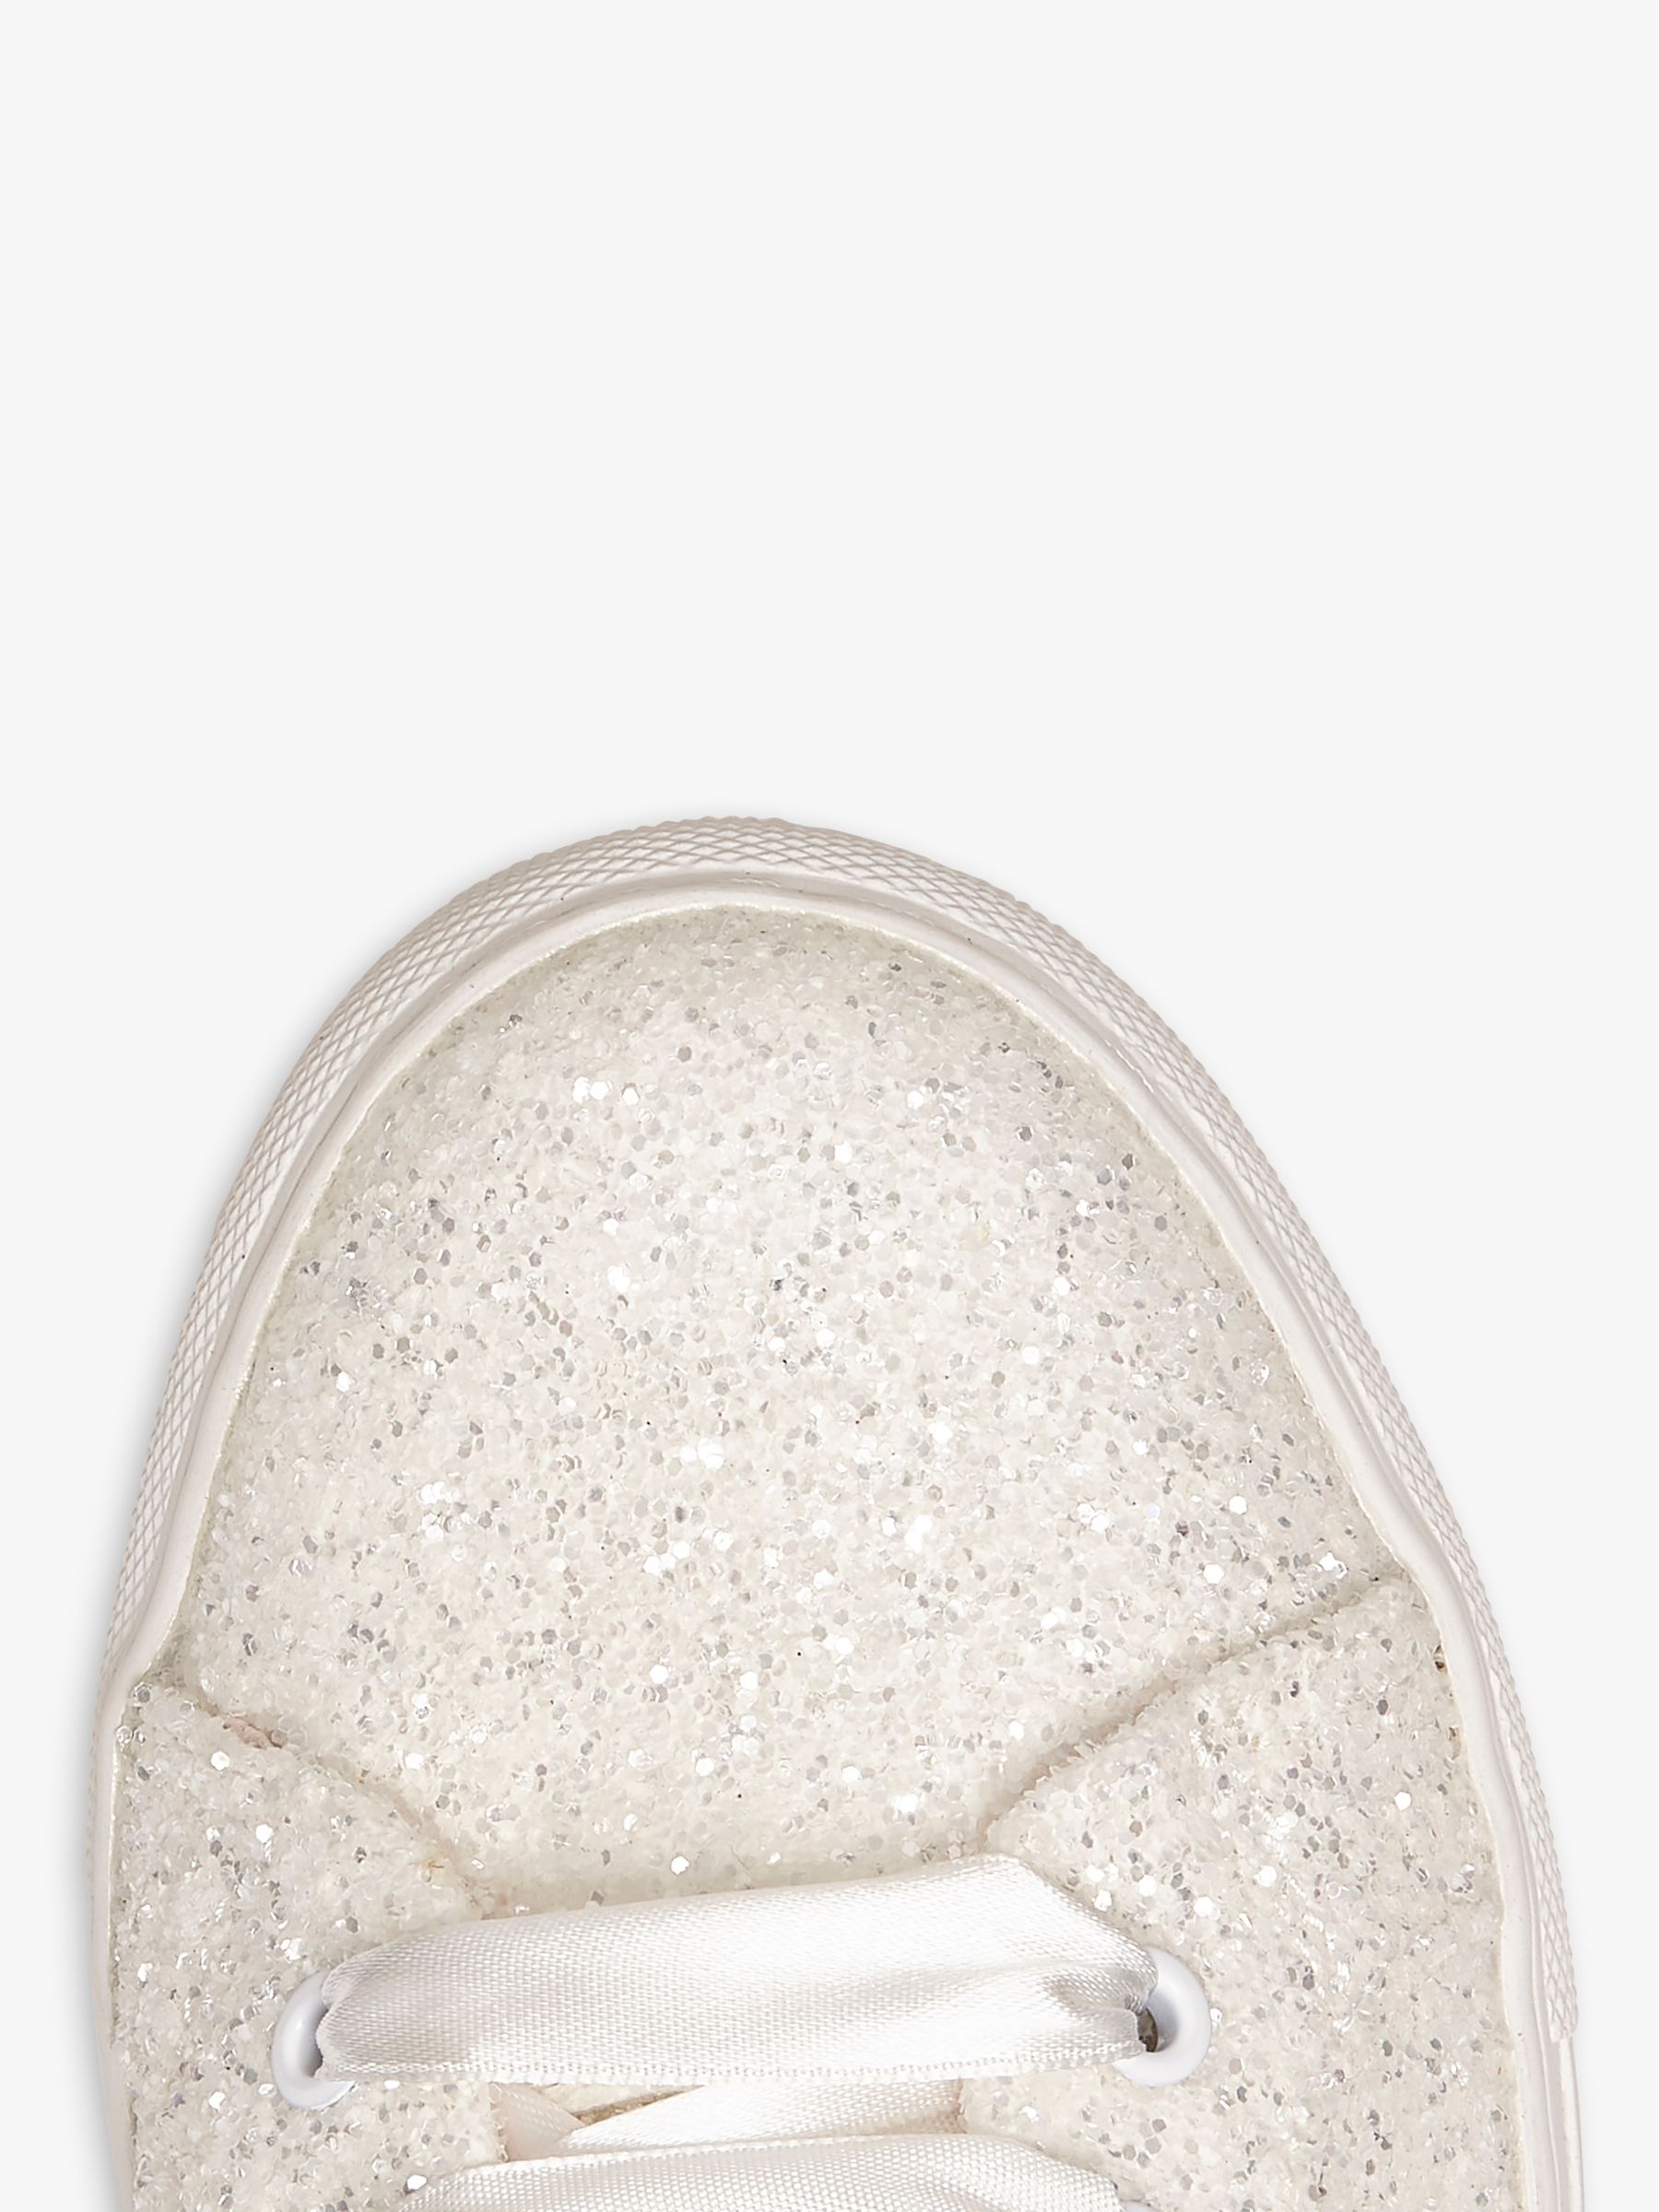 Buy Rainbow Club Athena Glitter Trainers, Ivory Snow Online at johnlewis.com